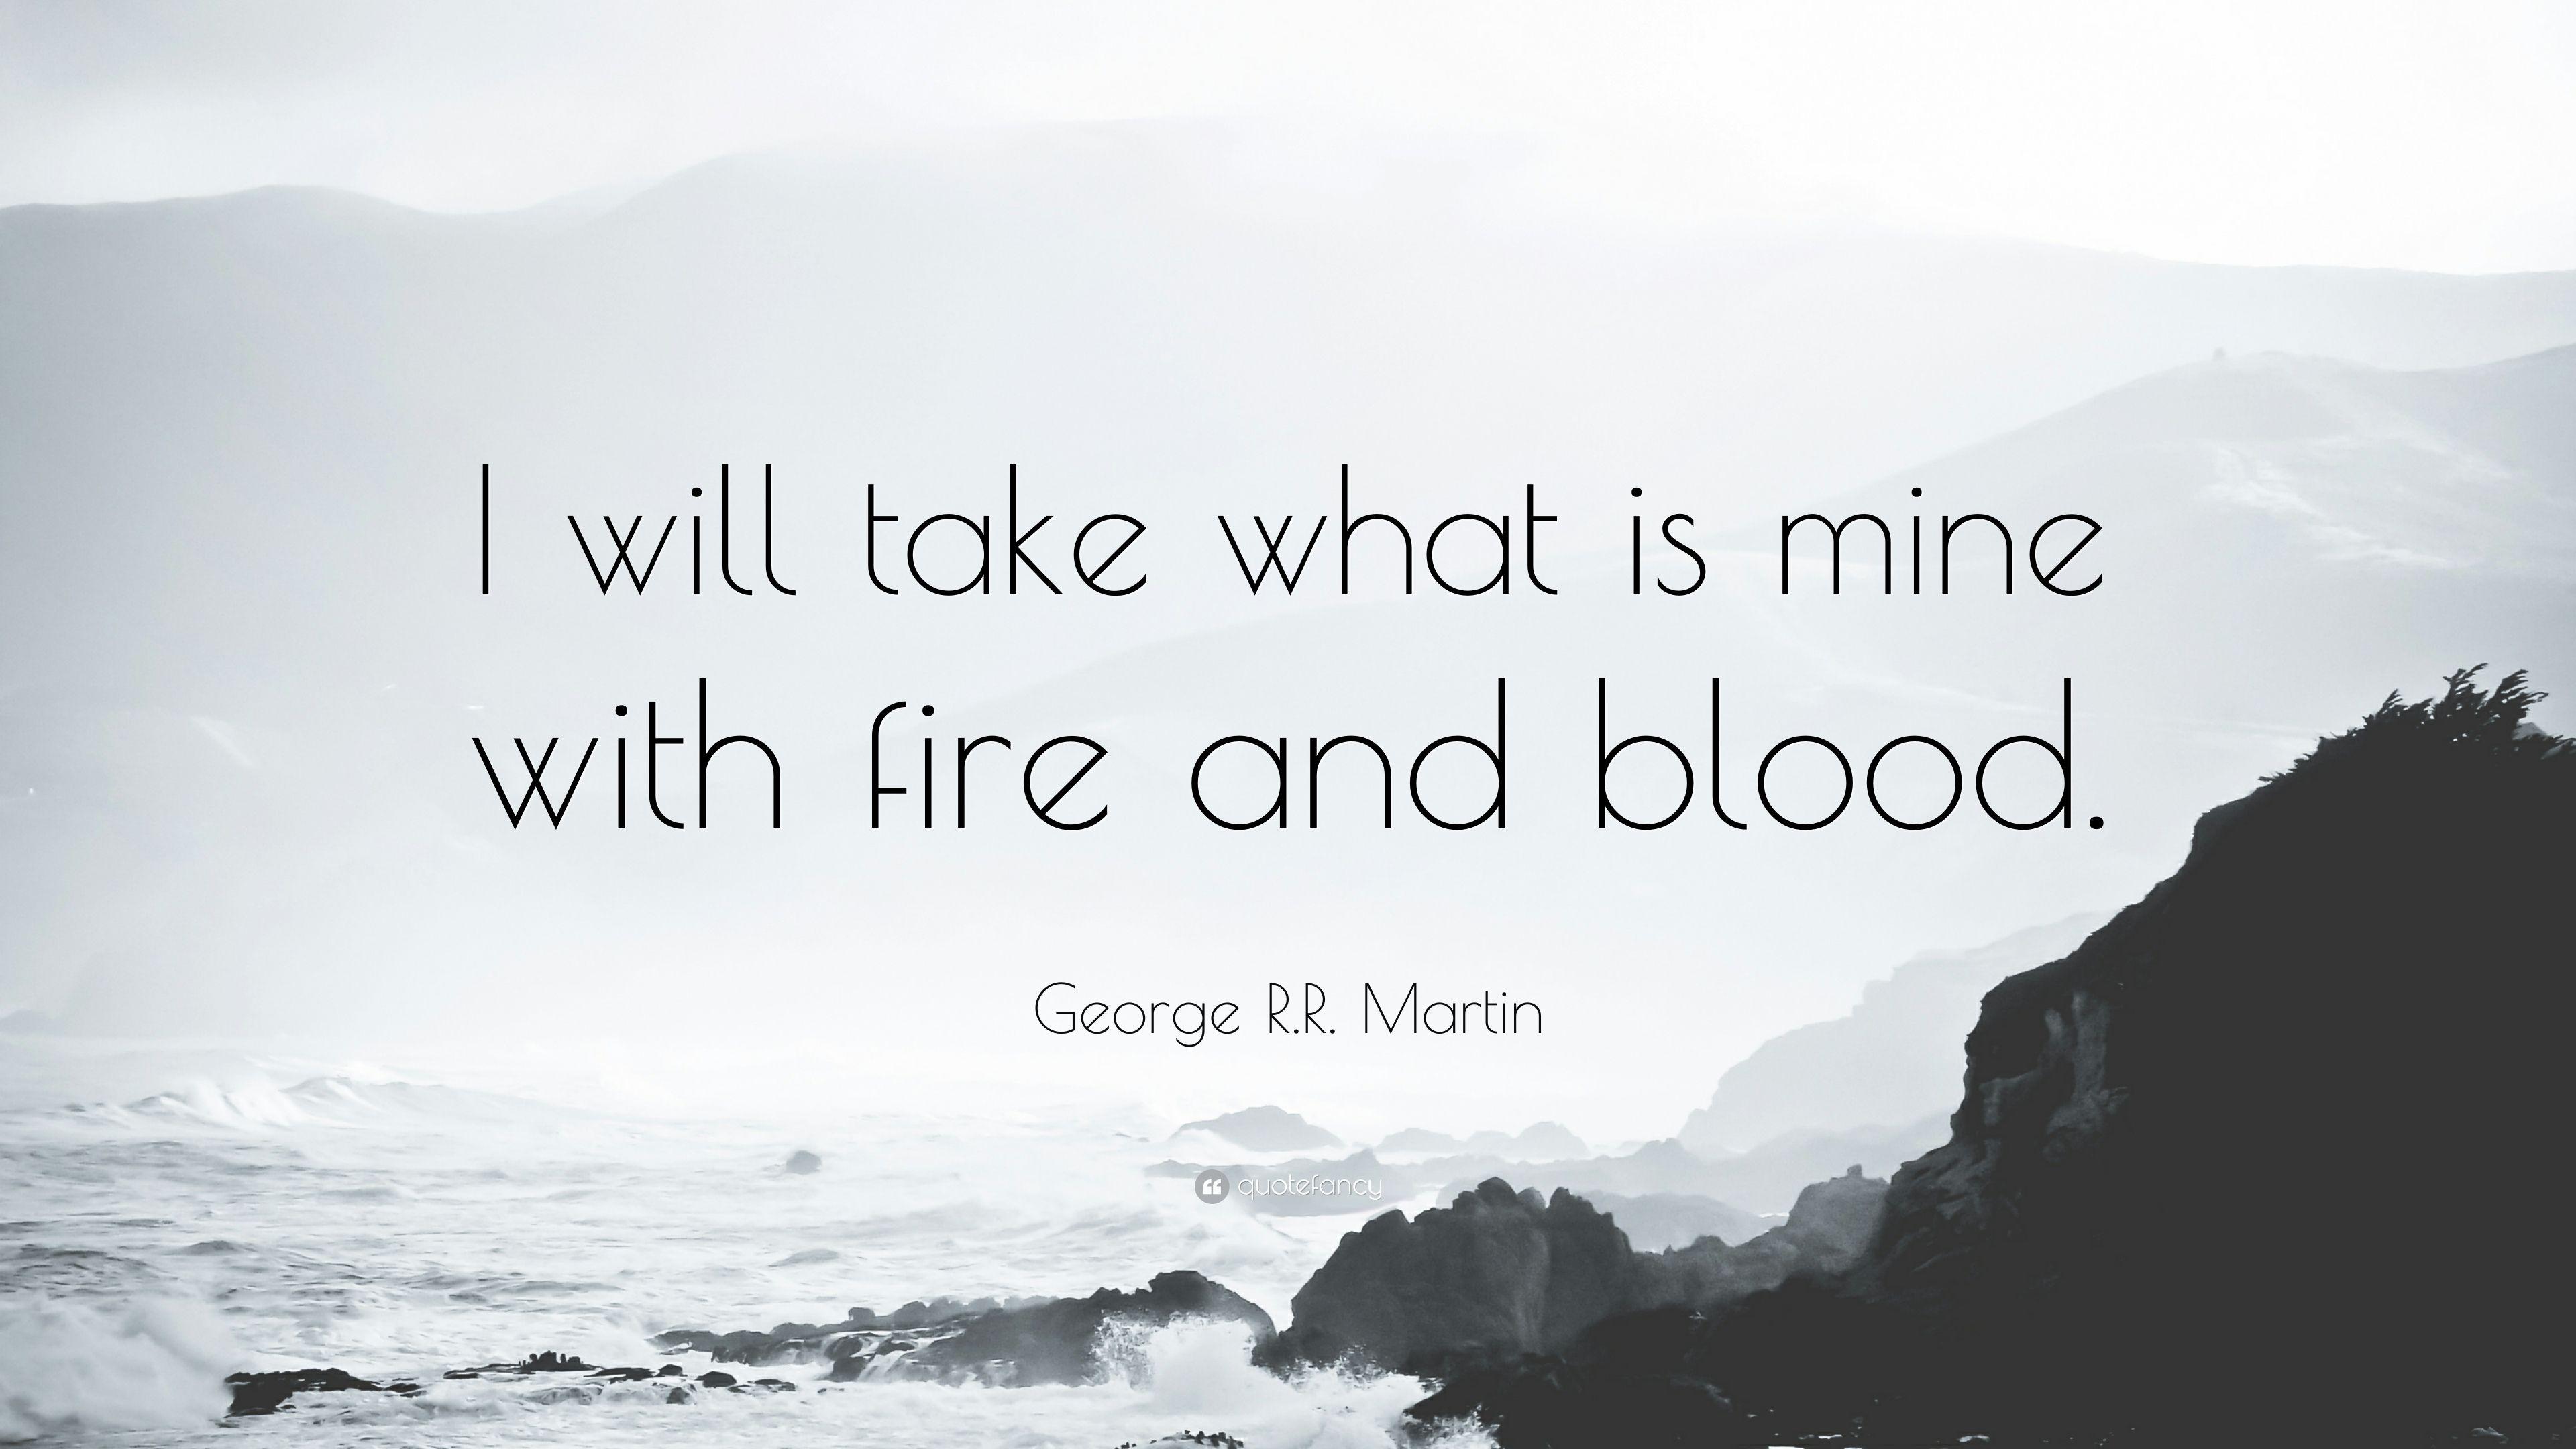 George R.R. Martin Quote: “I will take what is mine with fire and